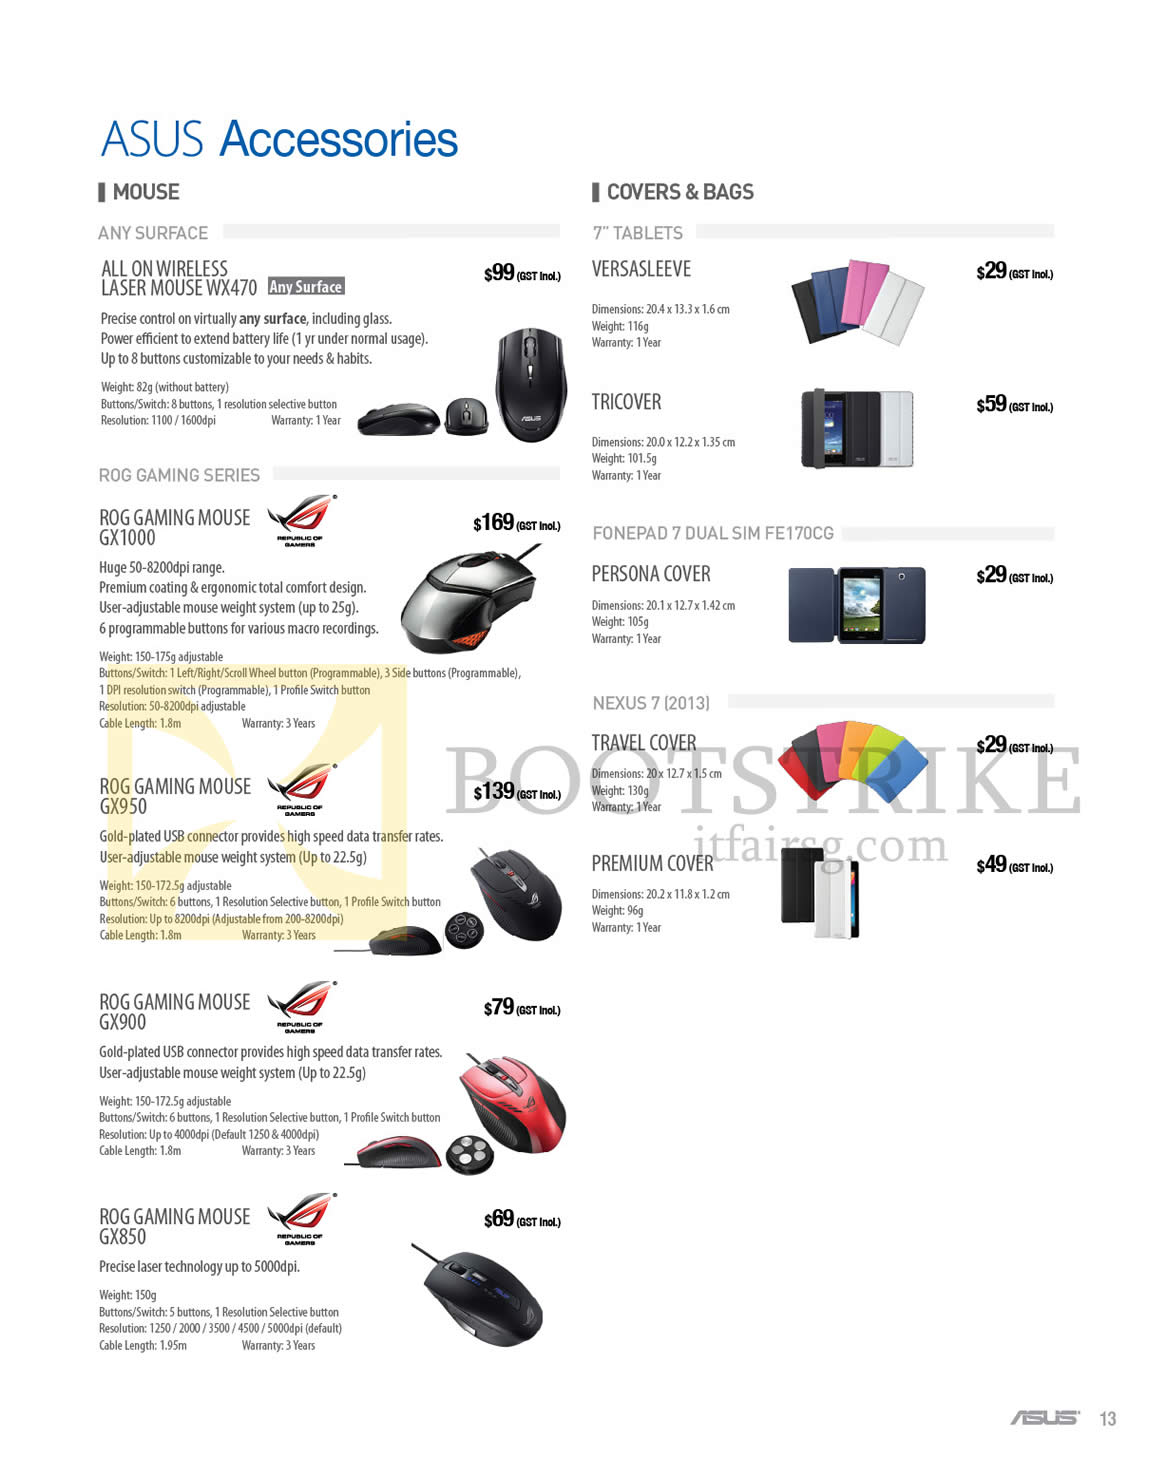 SITEX 2014 price list image brochure of ASUS Accessories Mouse, Covers, Bags, WX470, GX1000, GX950, GX900, GX850